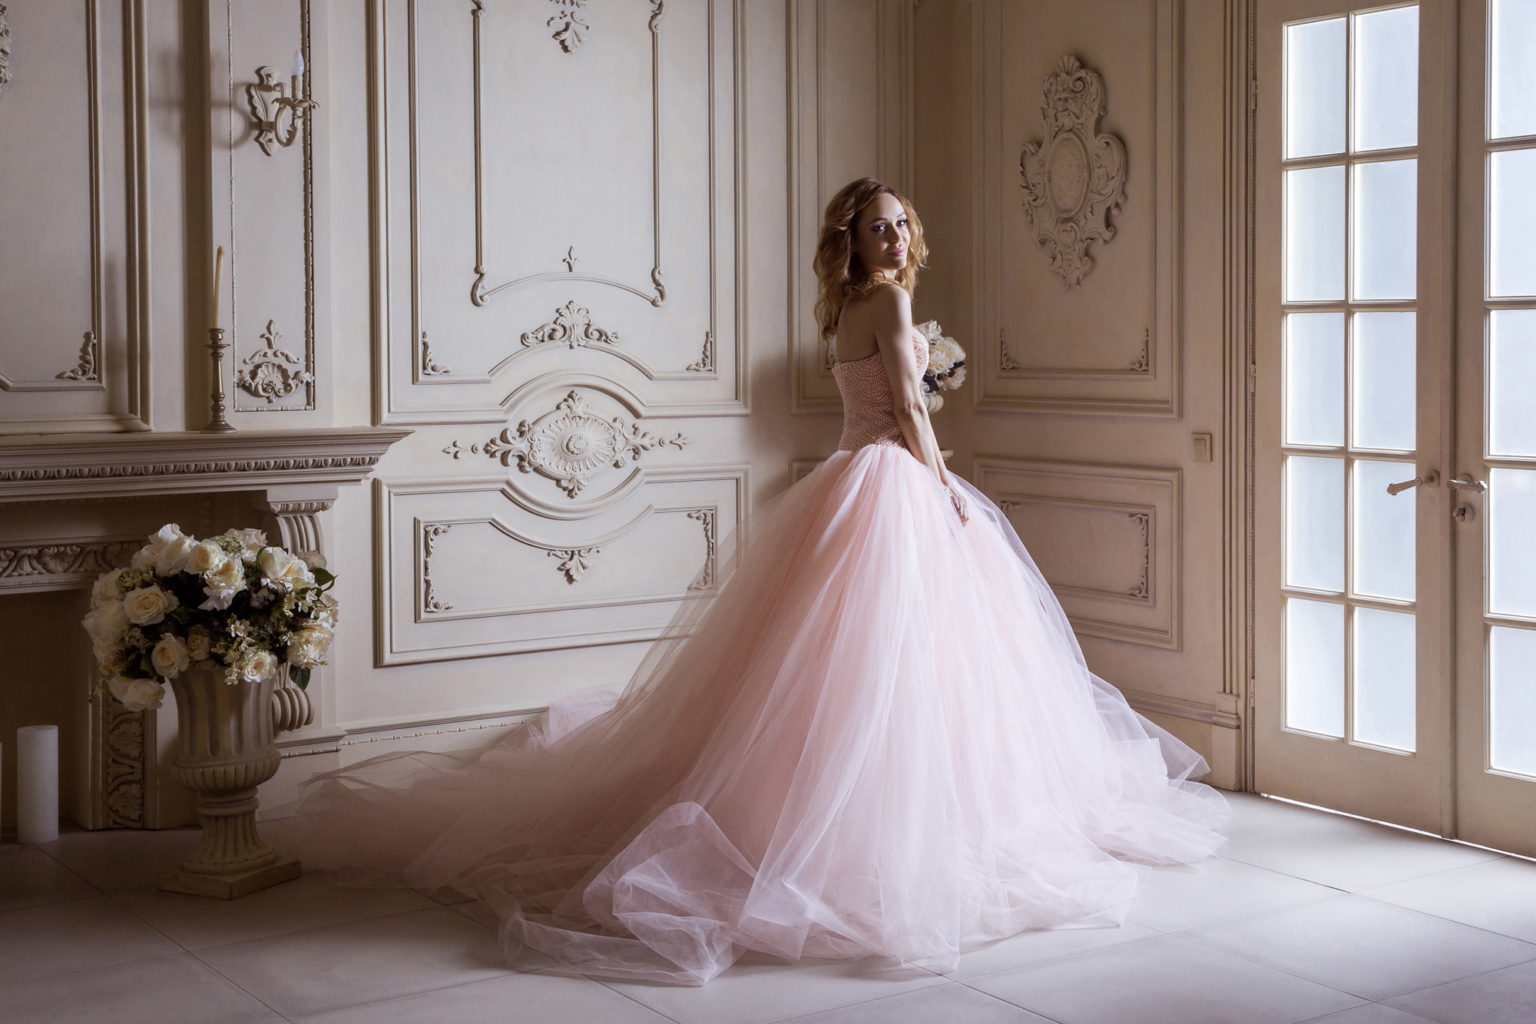 The base image was a stock photograph of a model with big dress in this beautiful room.